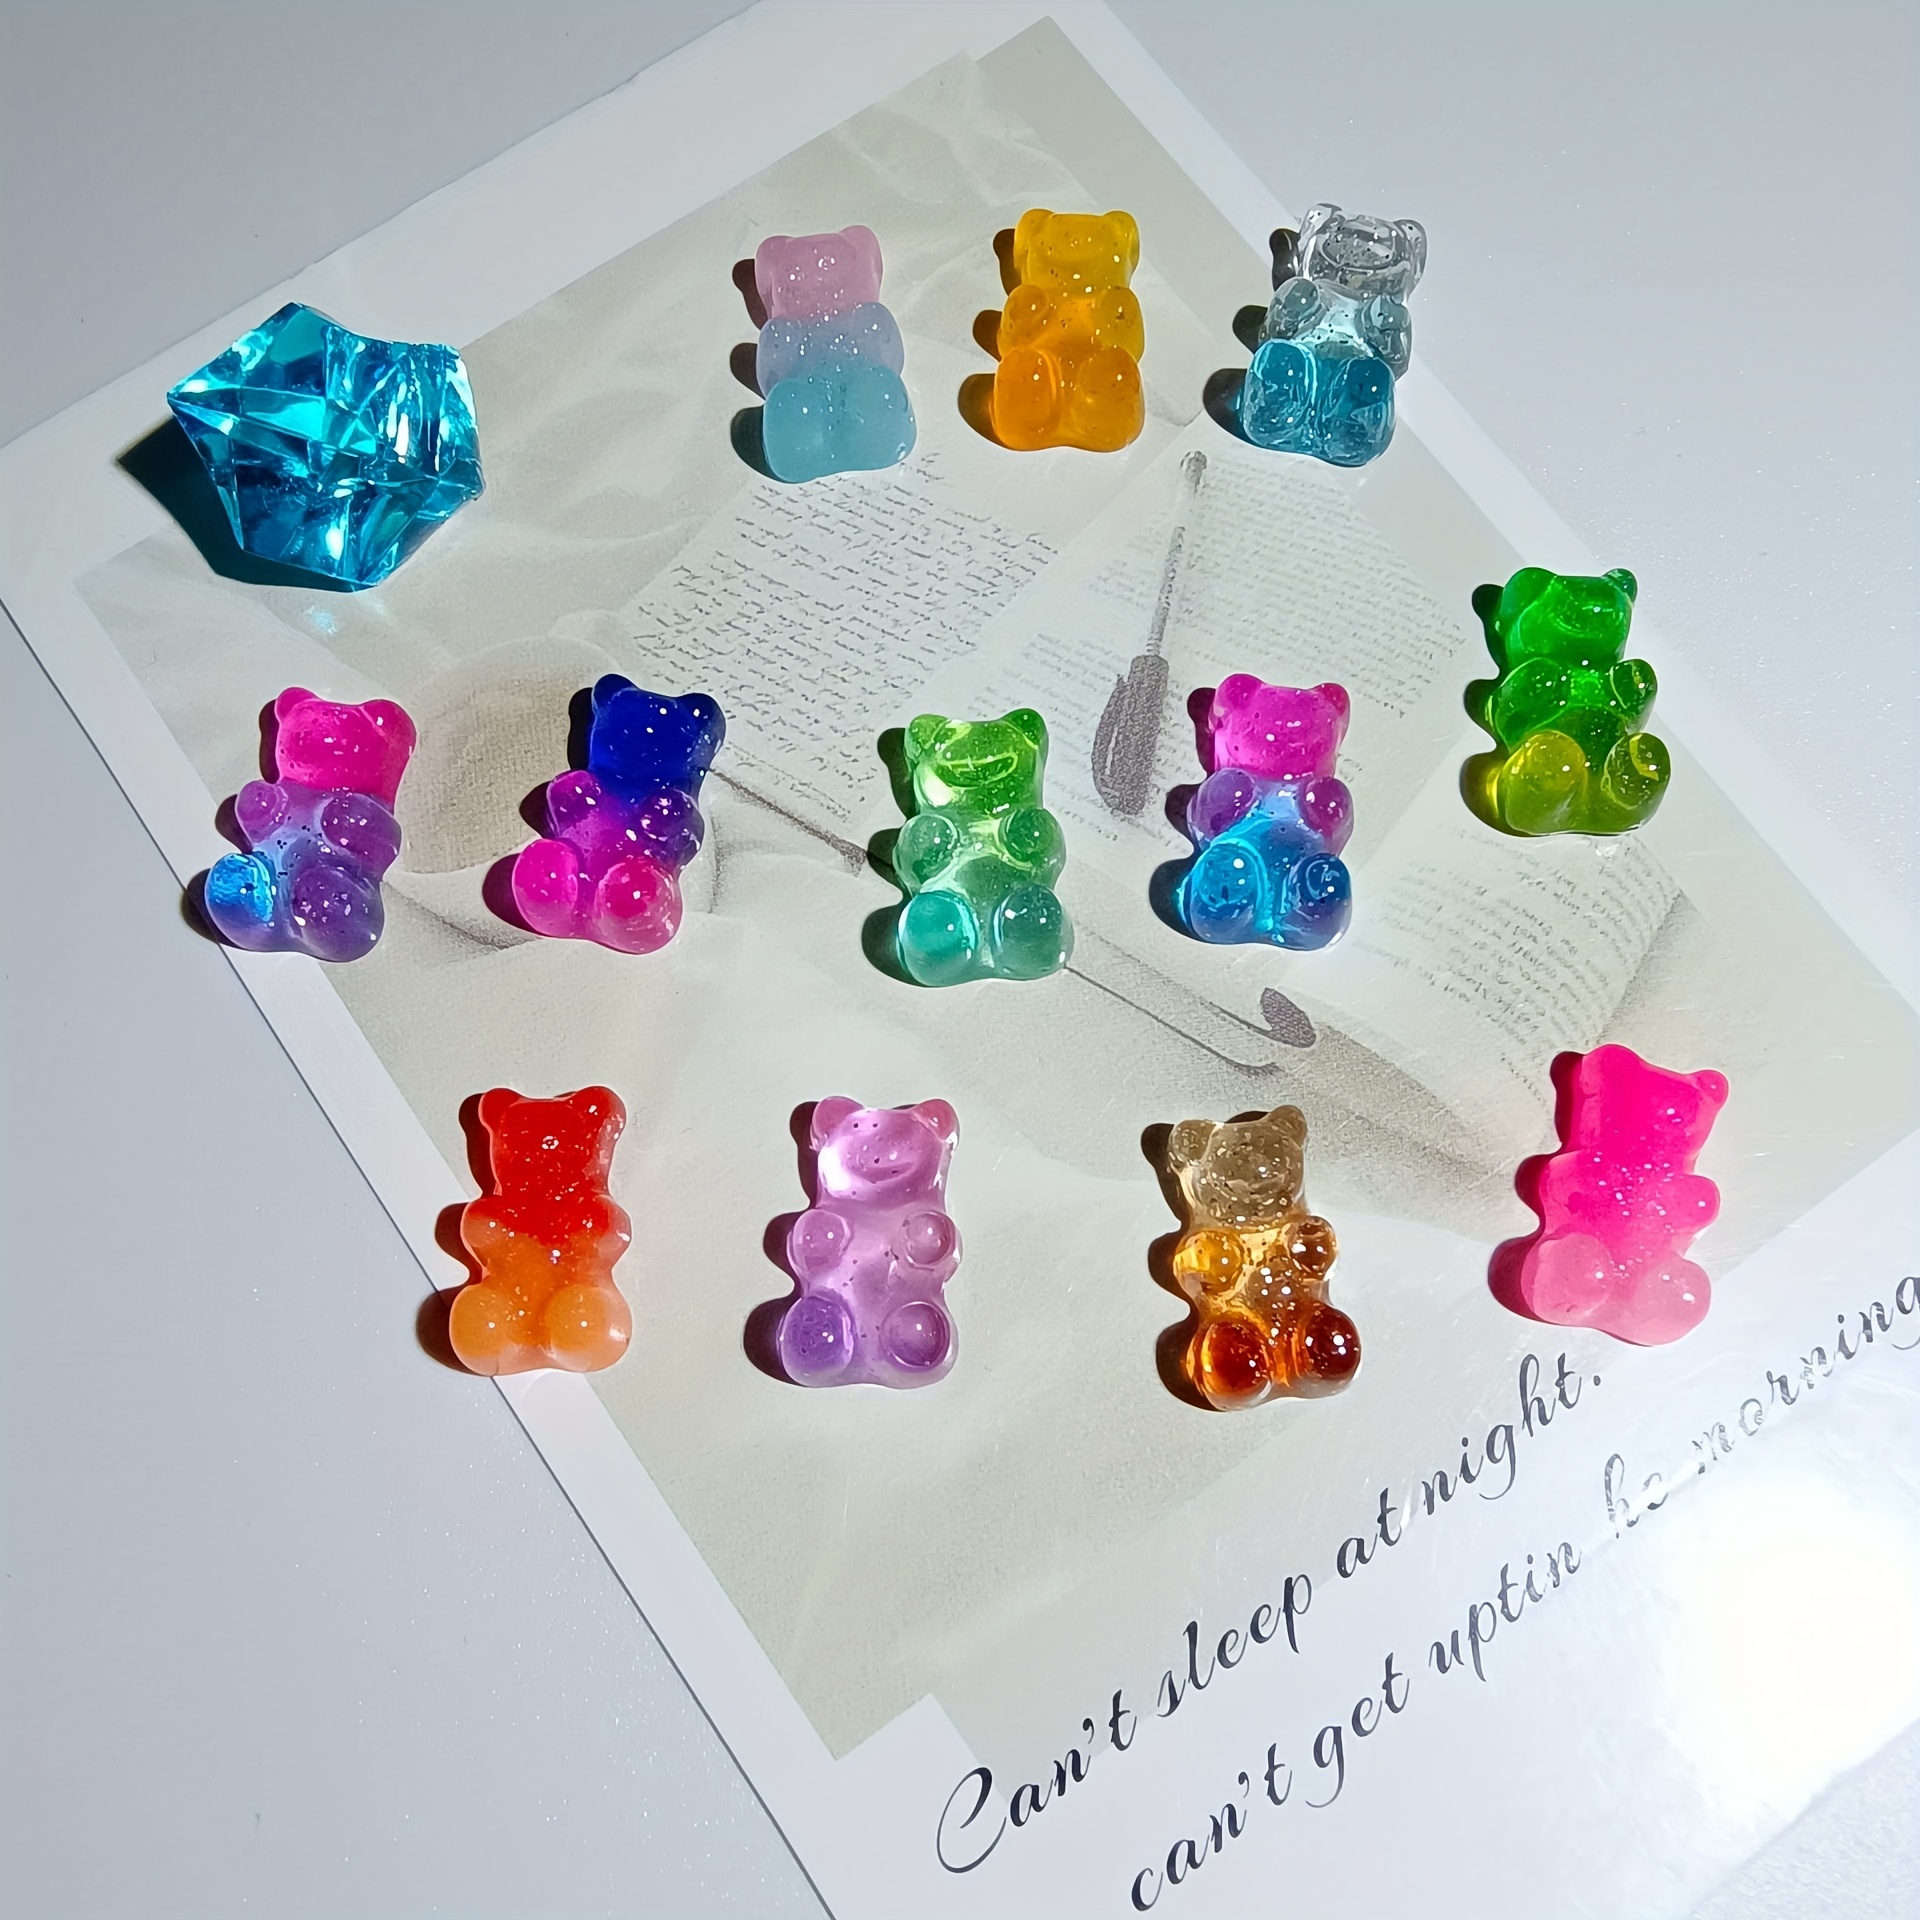 20pcs AB colors Gummy-Bear Charms Flatback Resin Candy Earring Pendant DIY  Accessory For Necklace